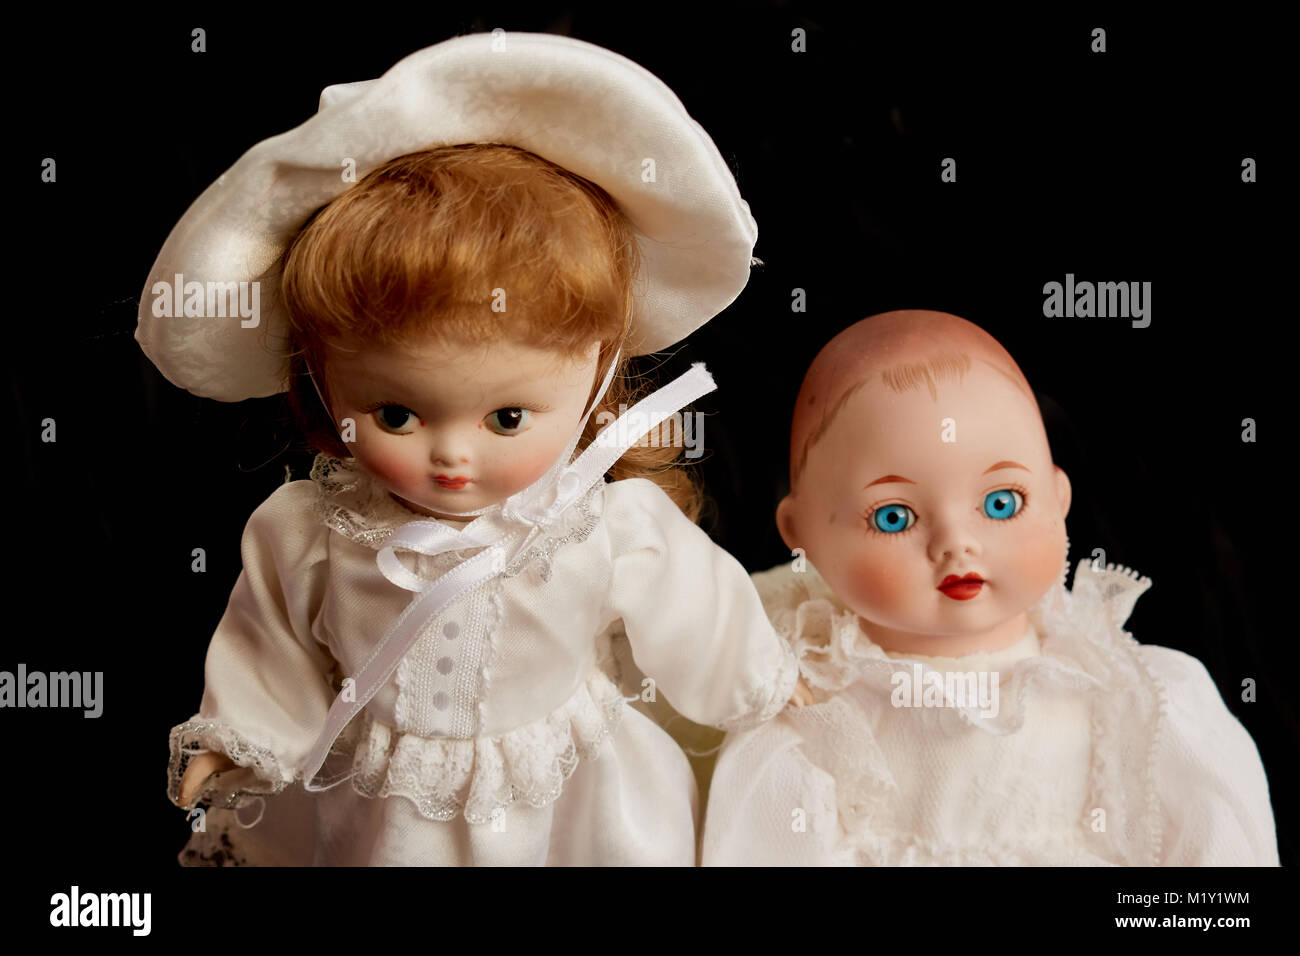 Closeup of two old porcelain dolls on black background Stock Photo